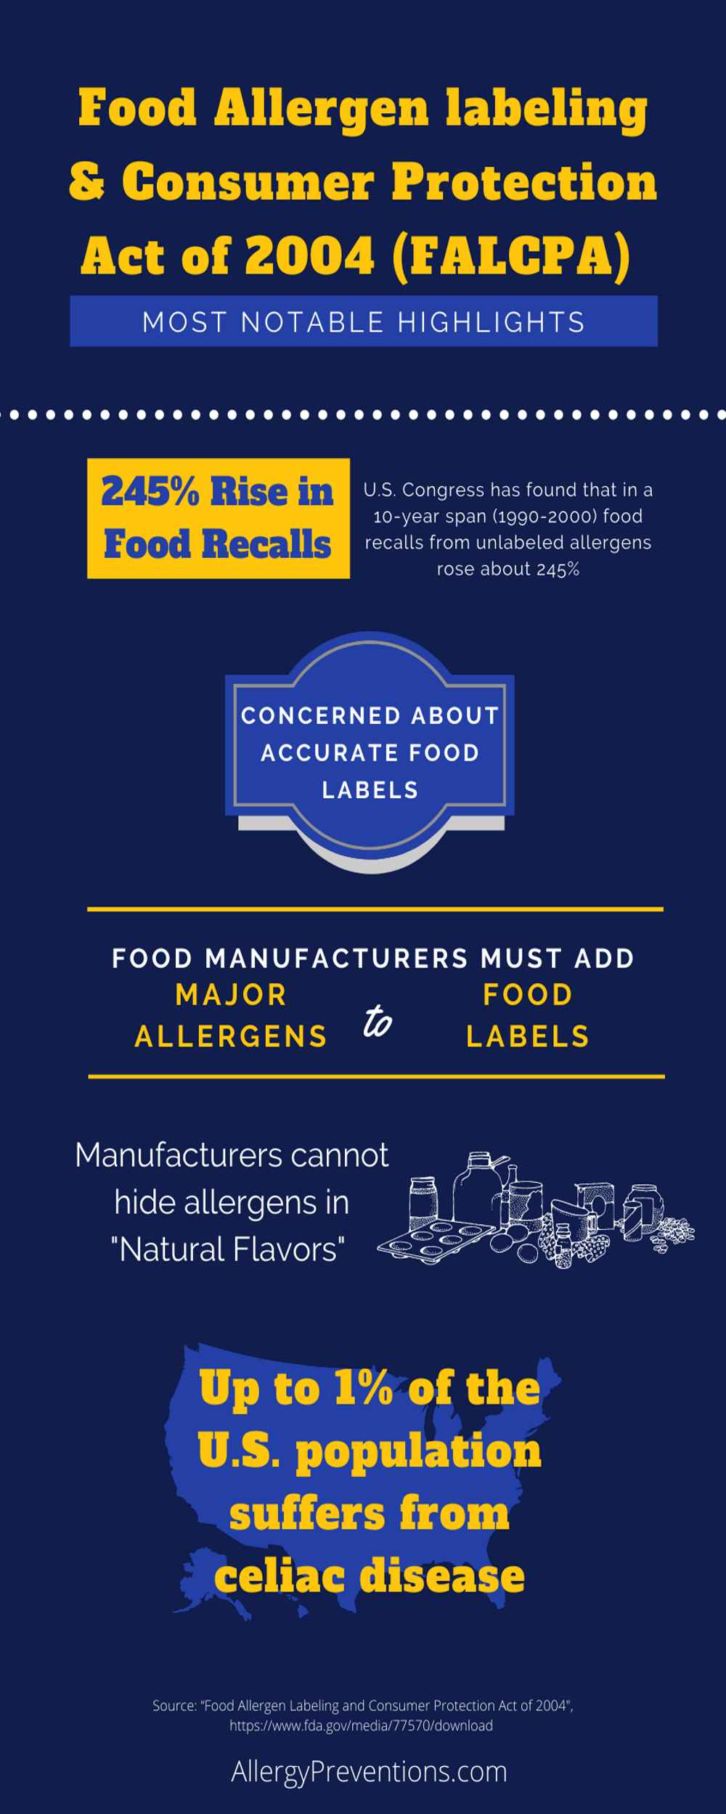 food allergen labeling and consumer protection act of 2004 (FALCPA) Infographic most notable highlights. U.S. Congress has found that in a 10-year span(1990-2000) food recalls from unlabeled allergens rose about 245%. FALCPA is concerned about accurate food labels, food manufacturers must add major allergens to food labels, manufacturers cannot hide allergens in "natural Flavors", up to 1% of the U.S. population suffers from celiac disease